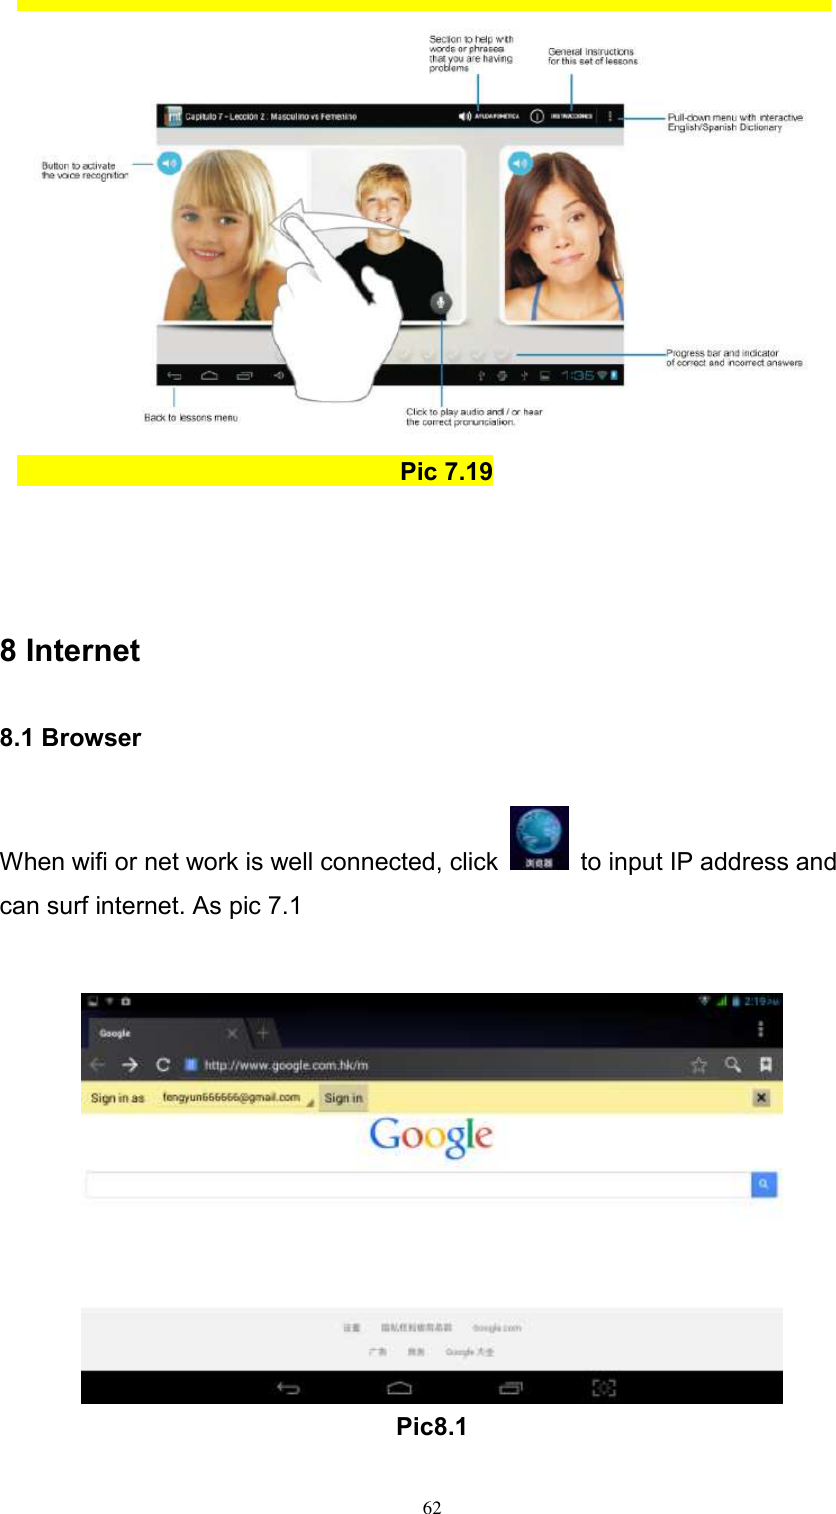      62                                                Pic 7.19     8 Internet 8.1 Browser When wifi or net work is well connected, click    to input IP address and can surf internet. As pic 7.1      Pic8.1 